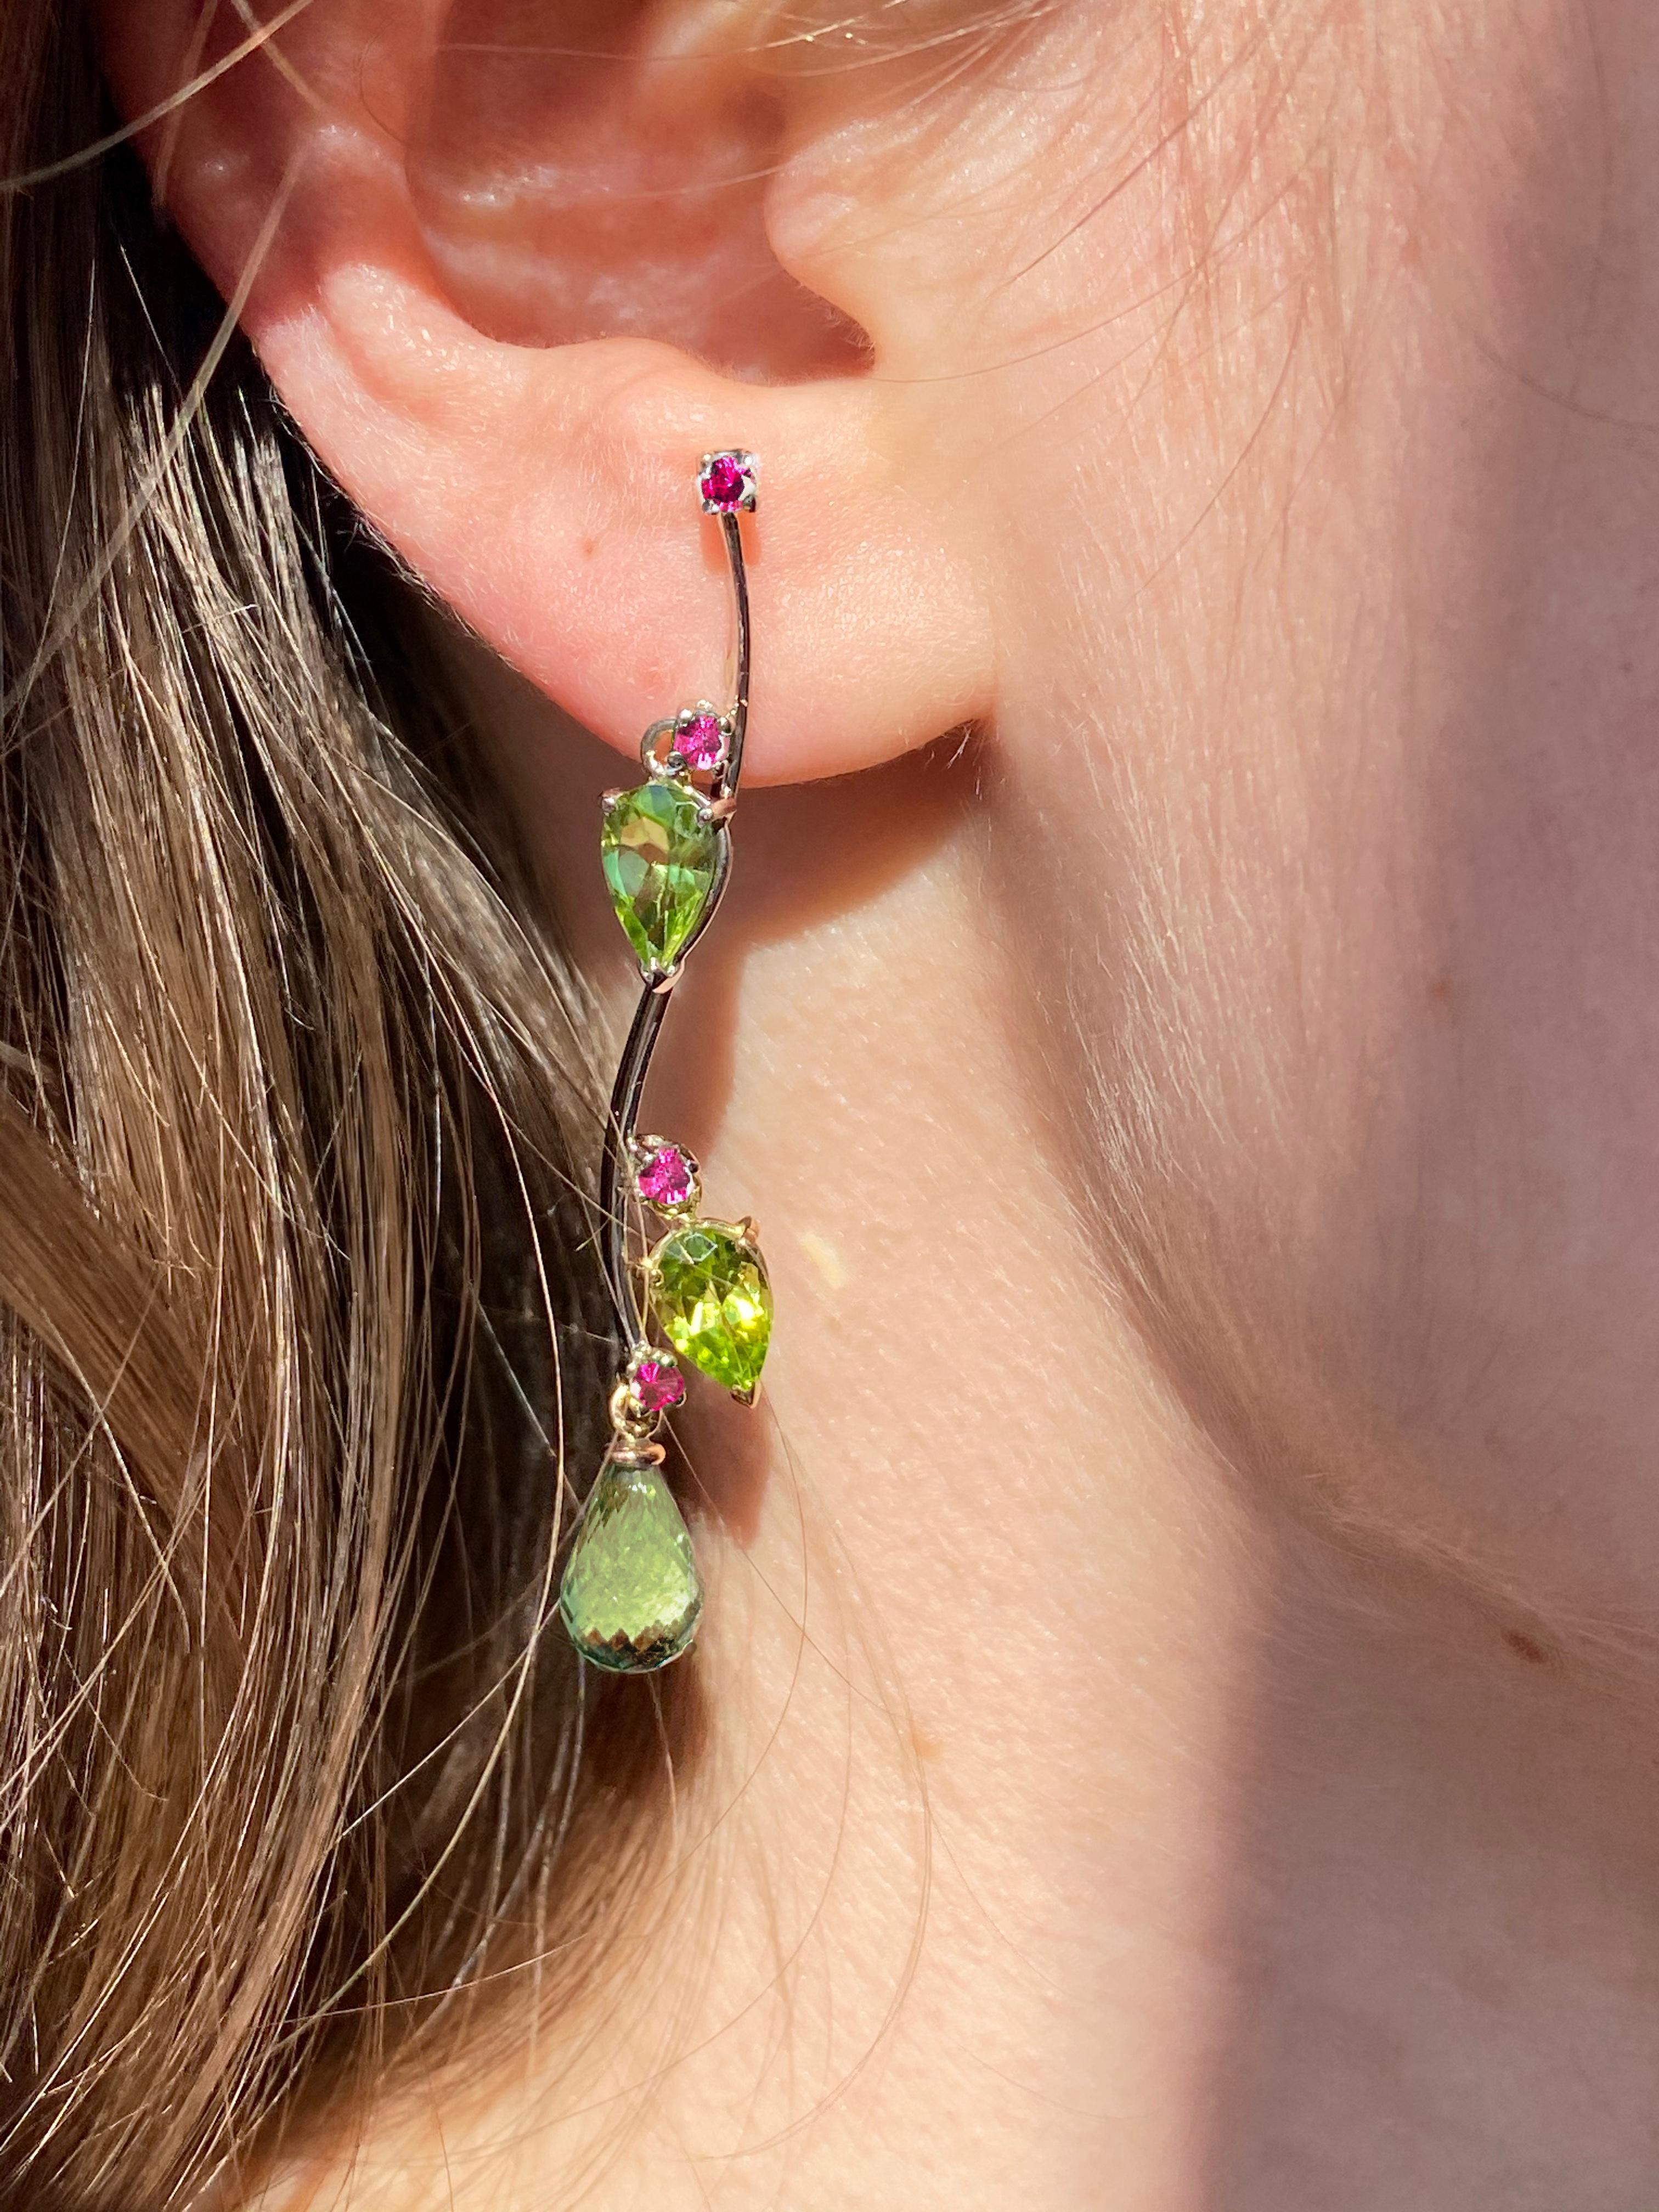 These exquisite Earrings, designed by Rossella Ugolini, feature a Modern Linear Style that is perfect for any occasion. Handcrafted in Italy, these earrings are made from 18k Yellow Gold and feature pear Briolet drops cut Green Tourmaline, round